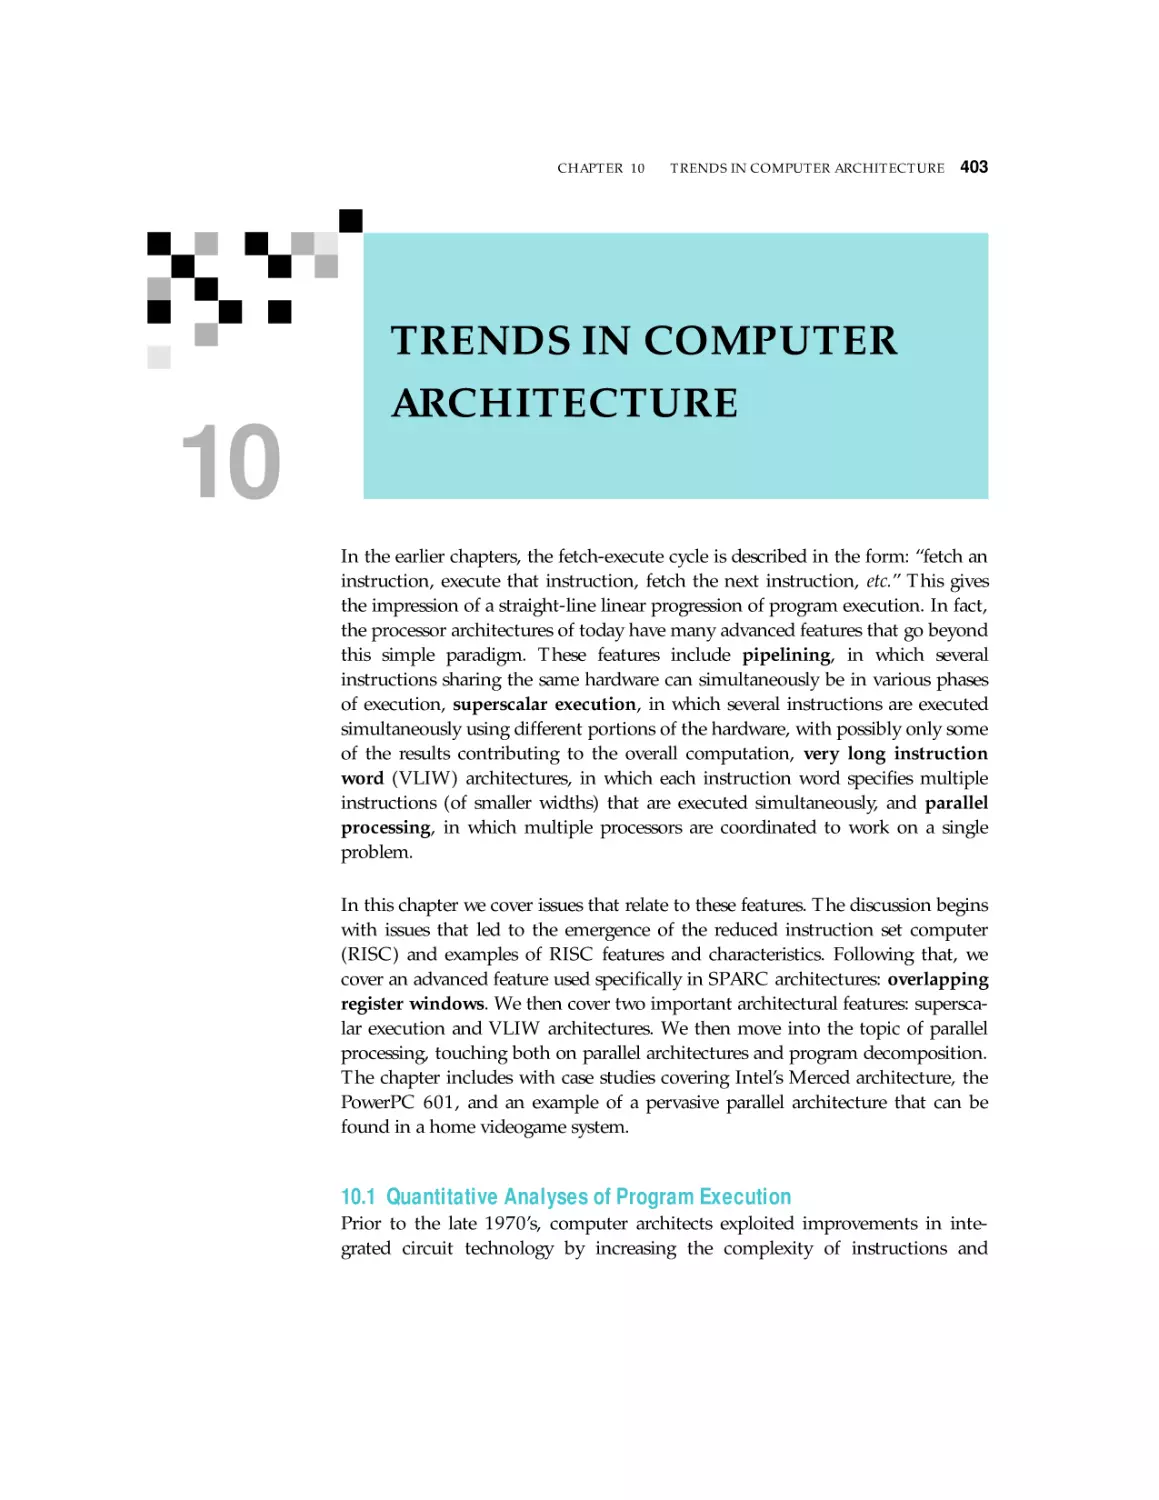 10. TRENDS IN COMPUTER ARCHITECTURE